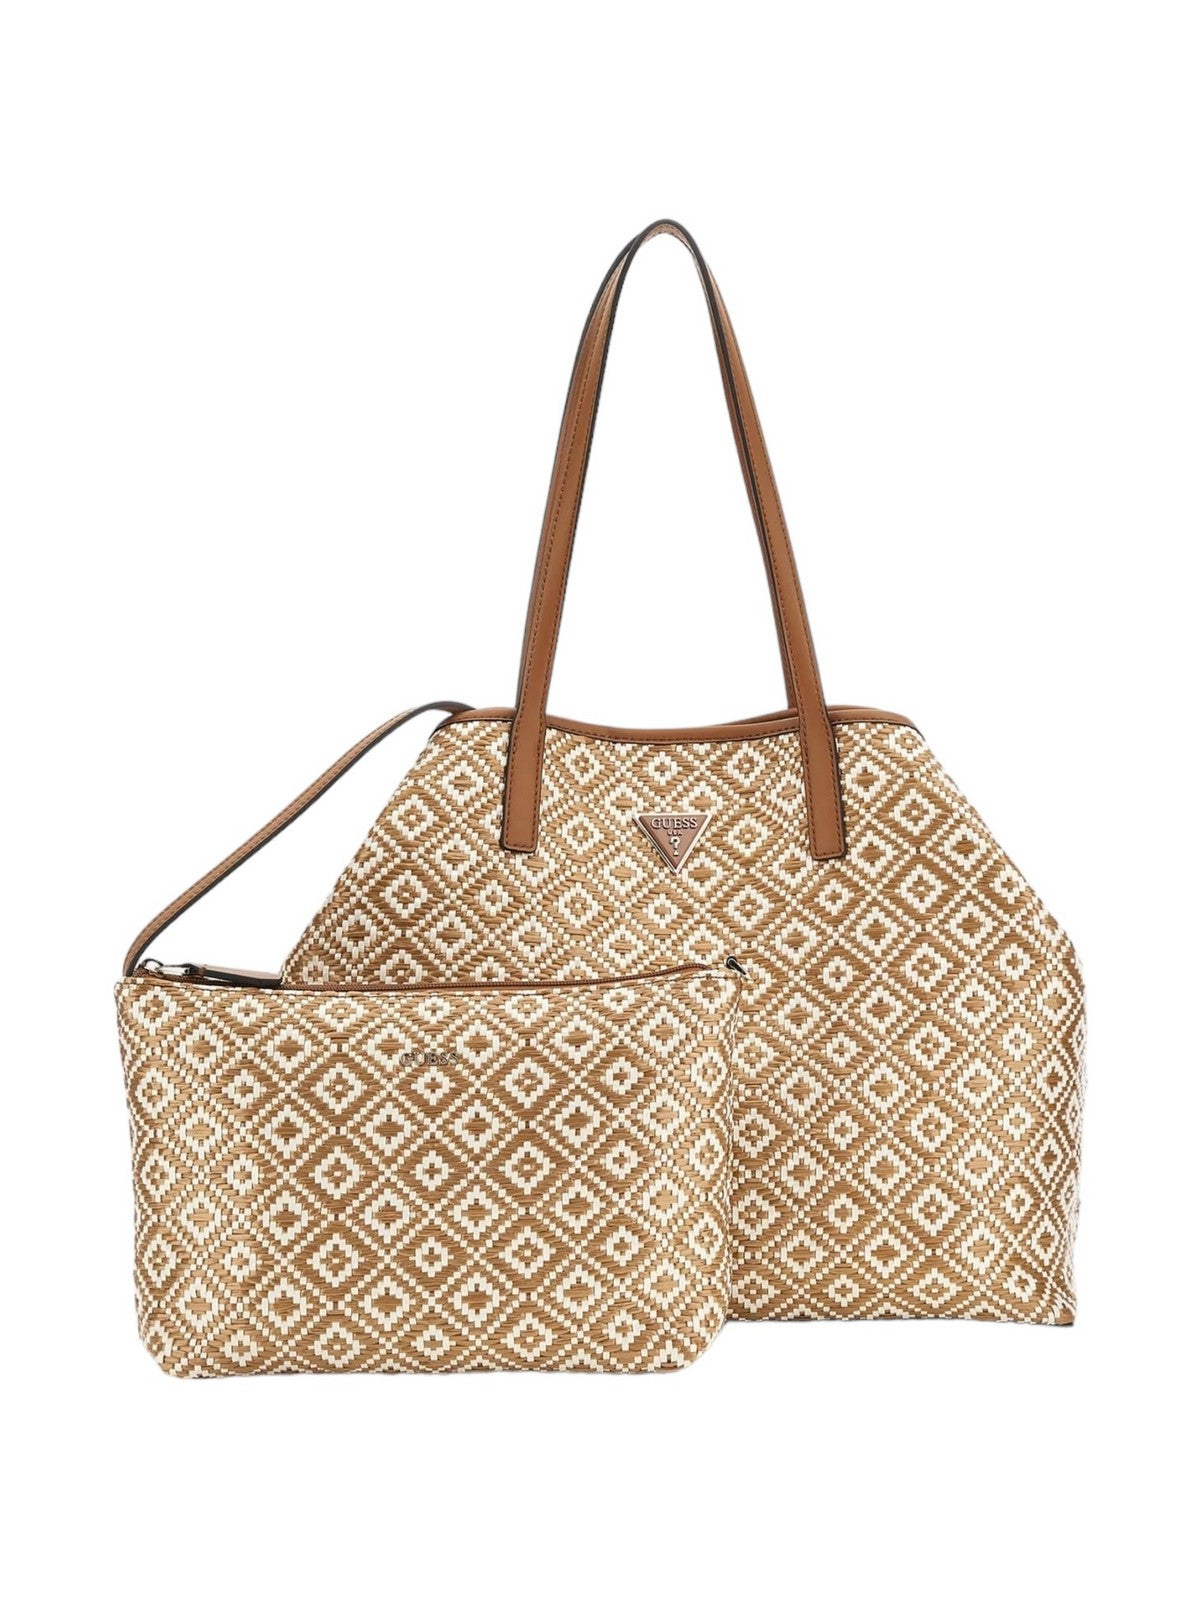 GUESS Borsa Donna Vikky Ii Large Tote HWWR93 18290 COG Marrone